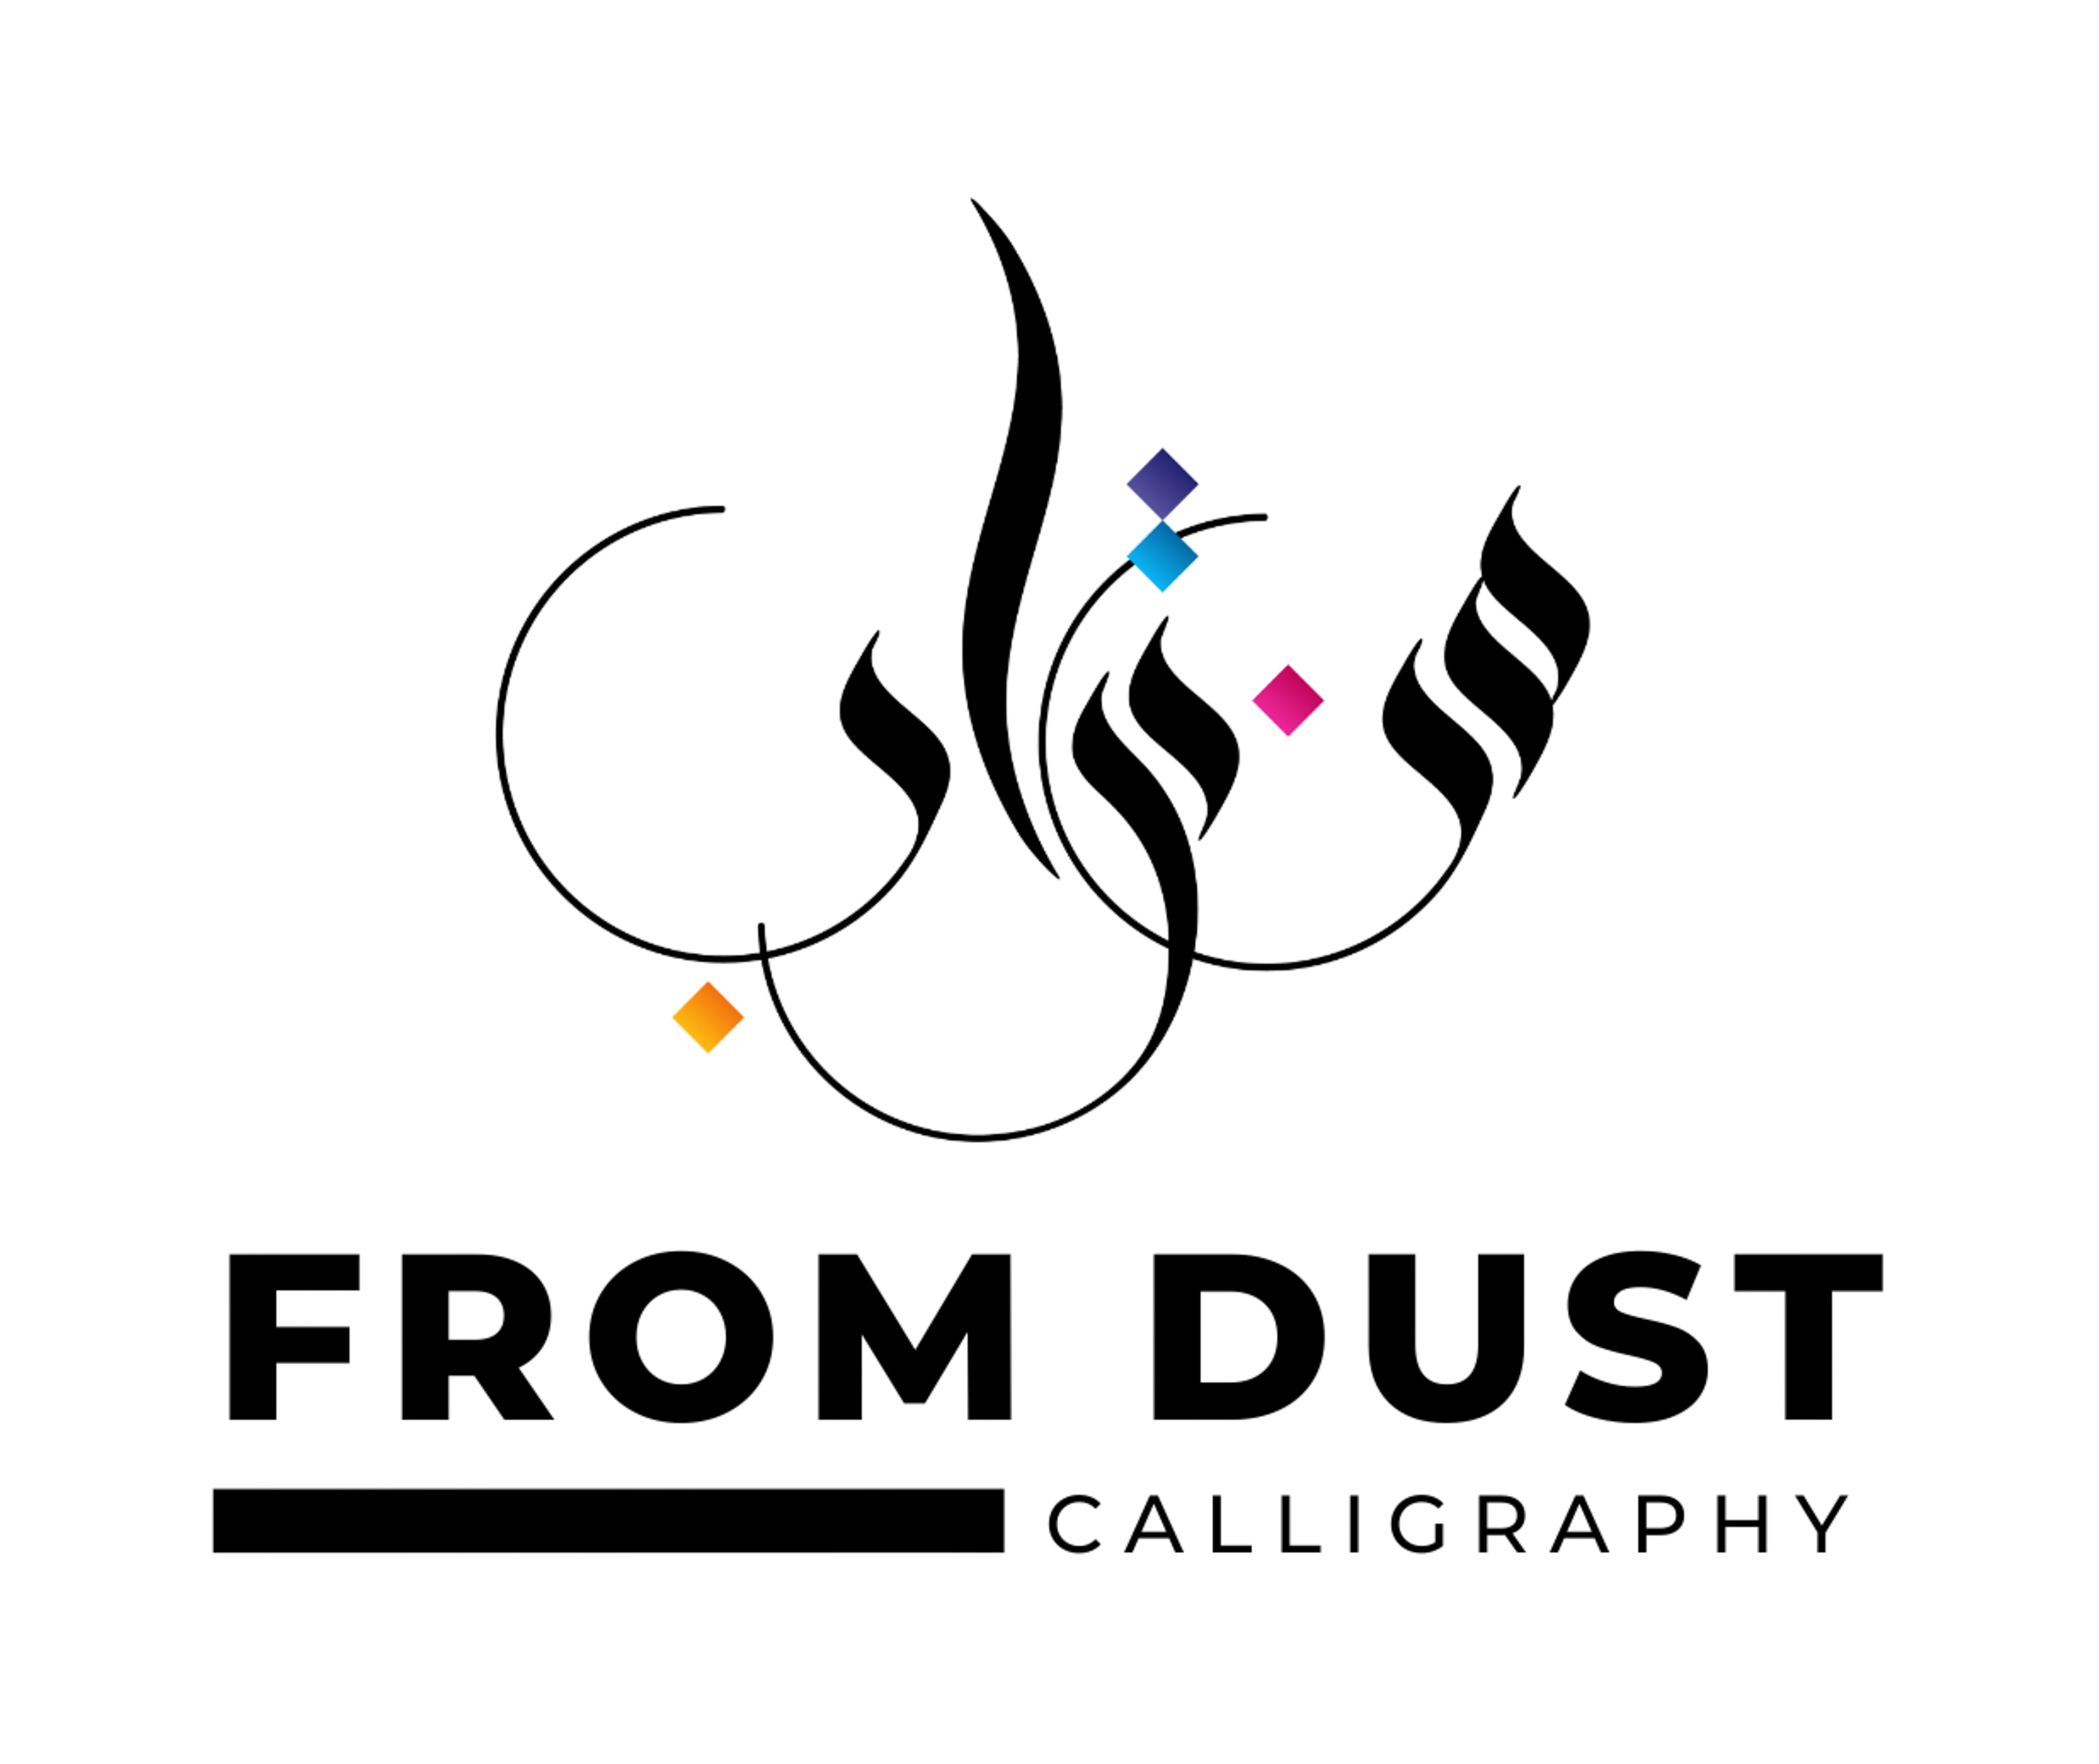 From Dust Calligraphy